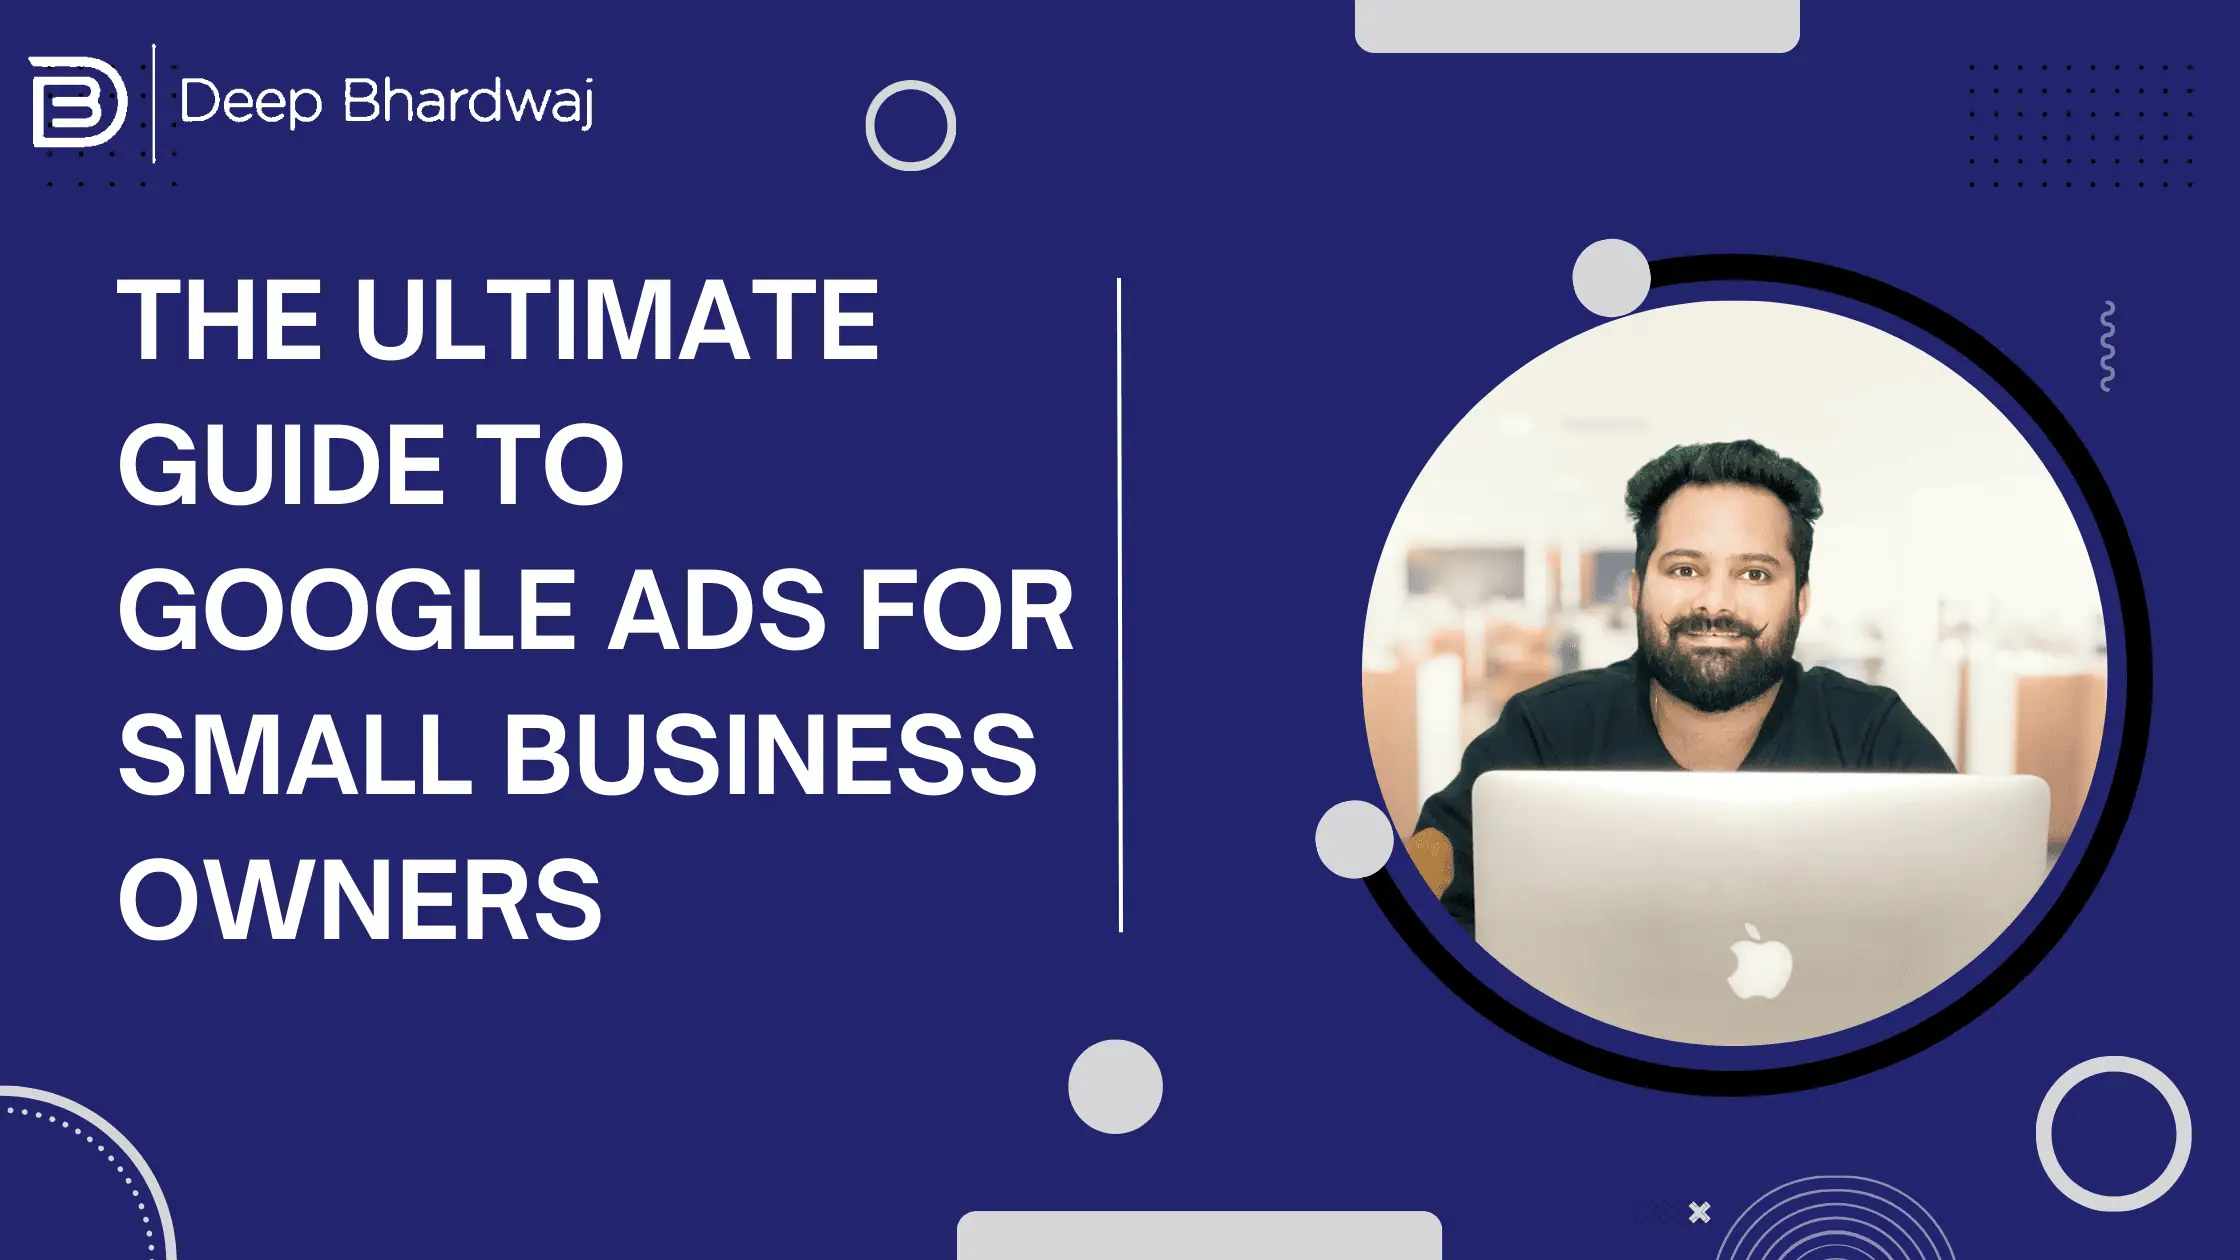 The Ultimate Guide to Google Ads for small business owners